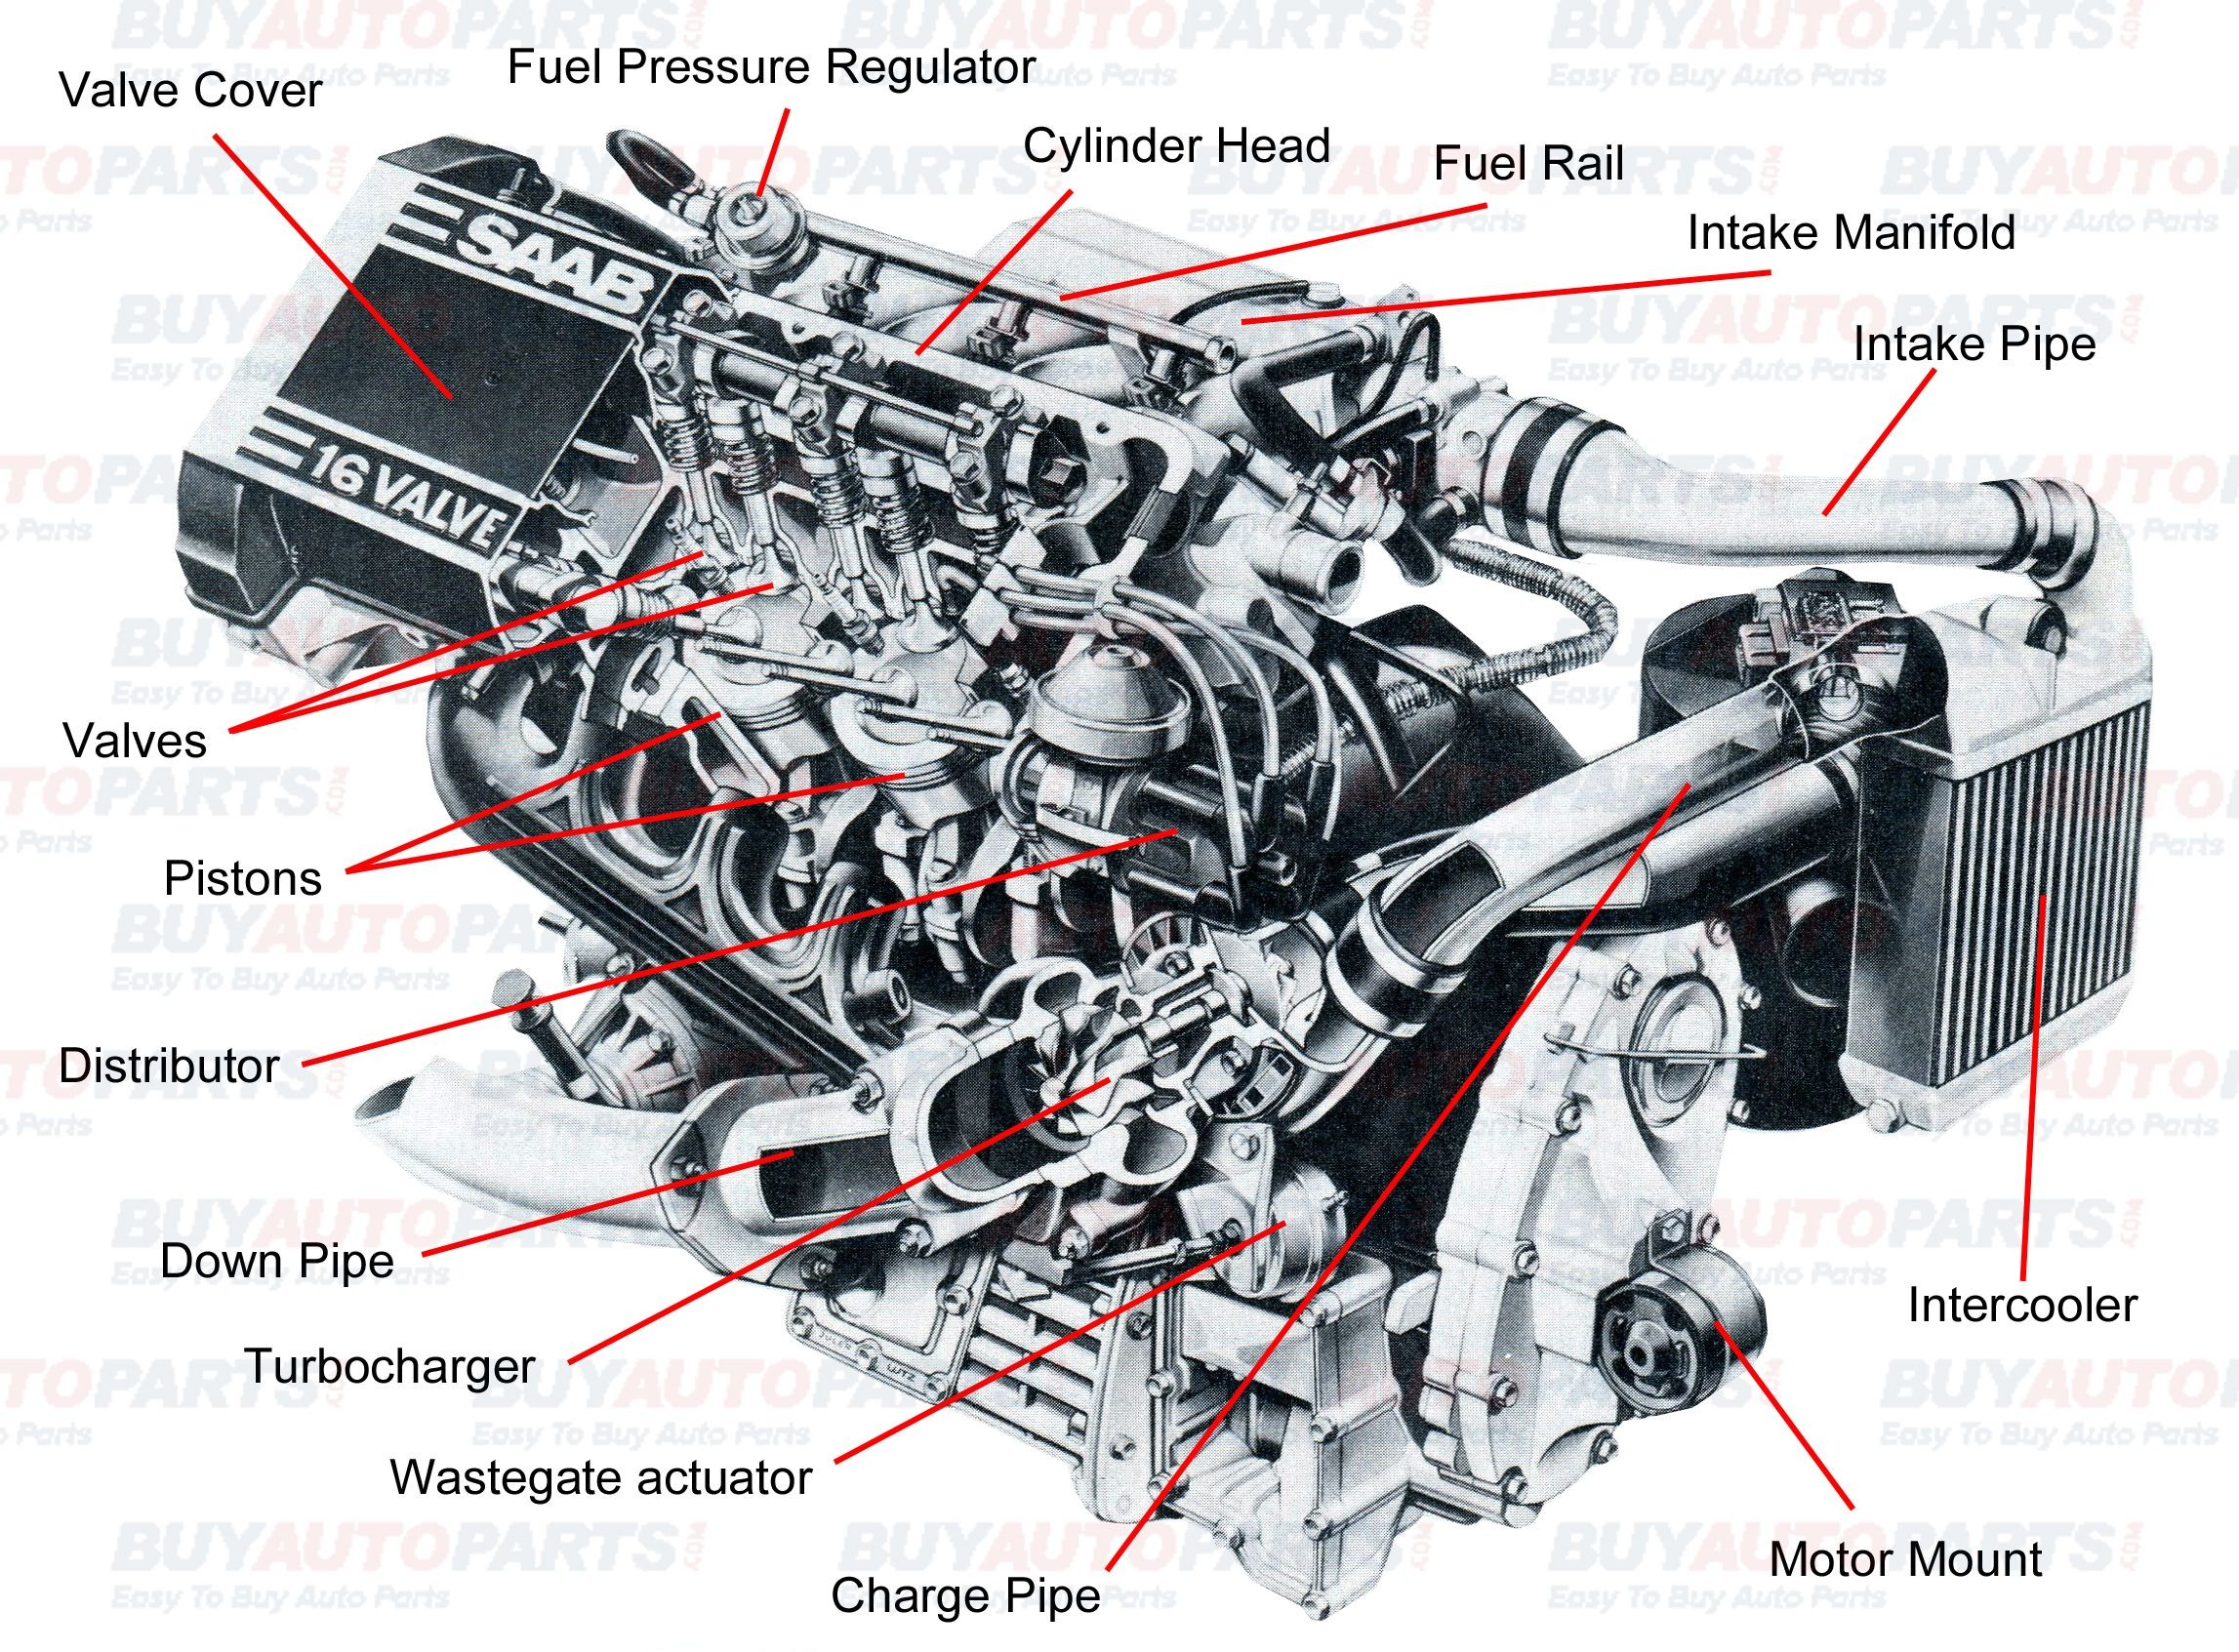 Car Engine Parts Names with Diagram Pin by Jimmiejanet Testellamwfz On What Does An Engine with Turbo Of Car Engine Parts Names with Diagram